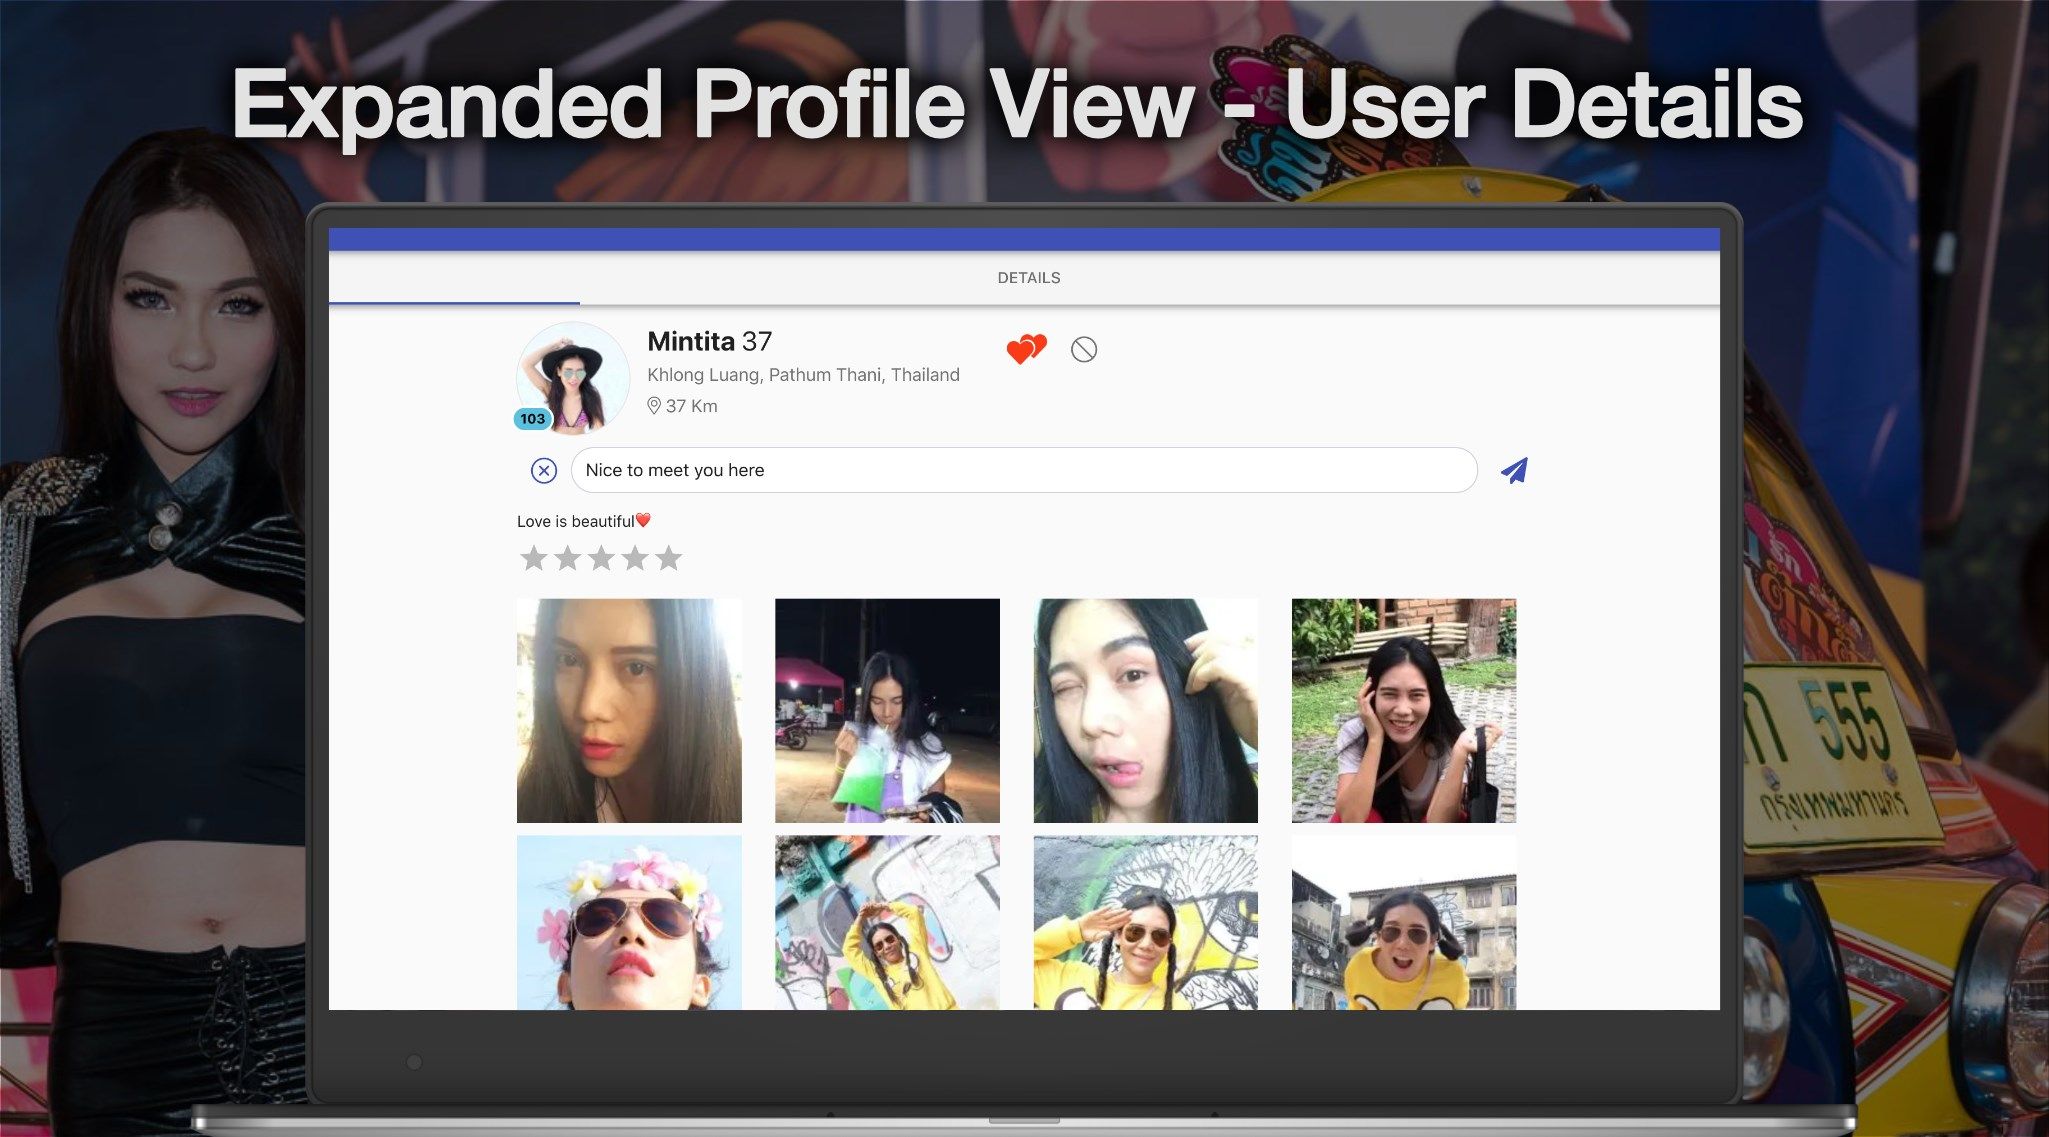 Expanded Profile view - full user details